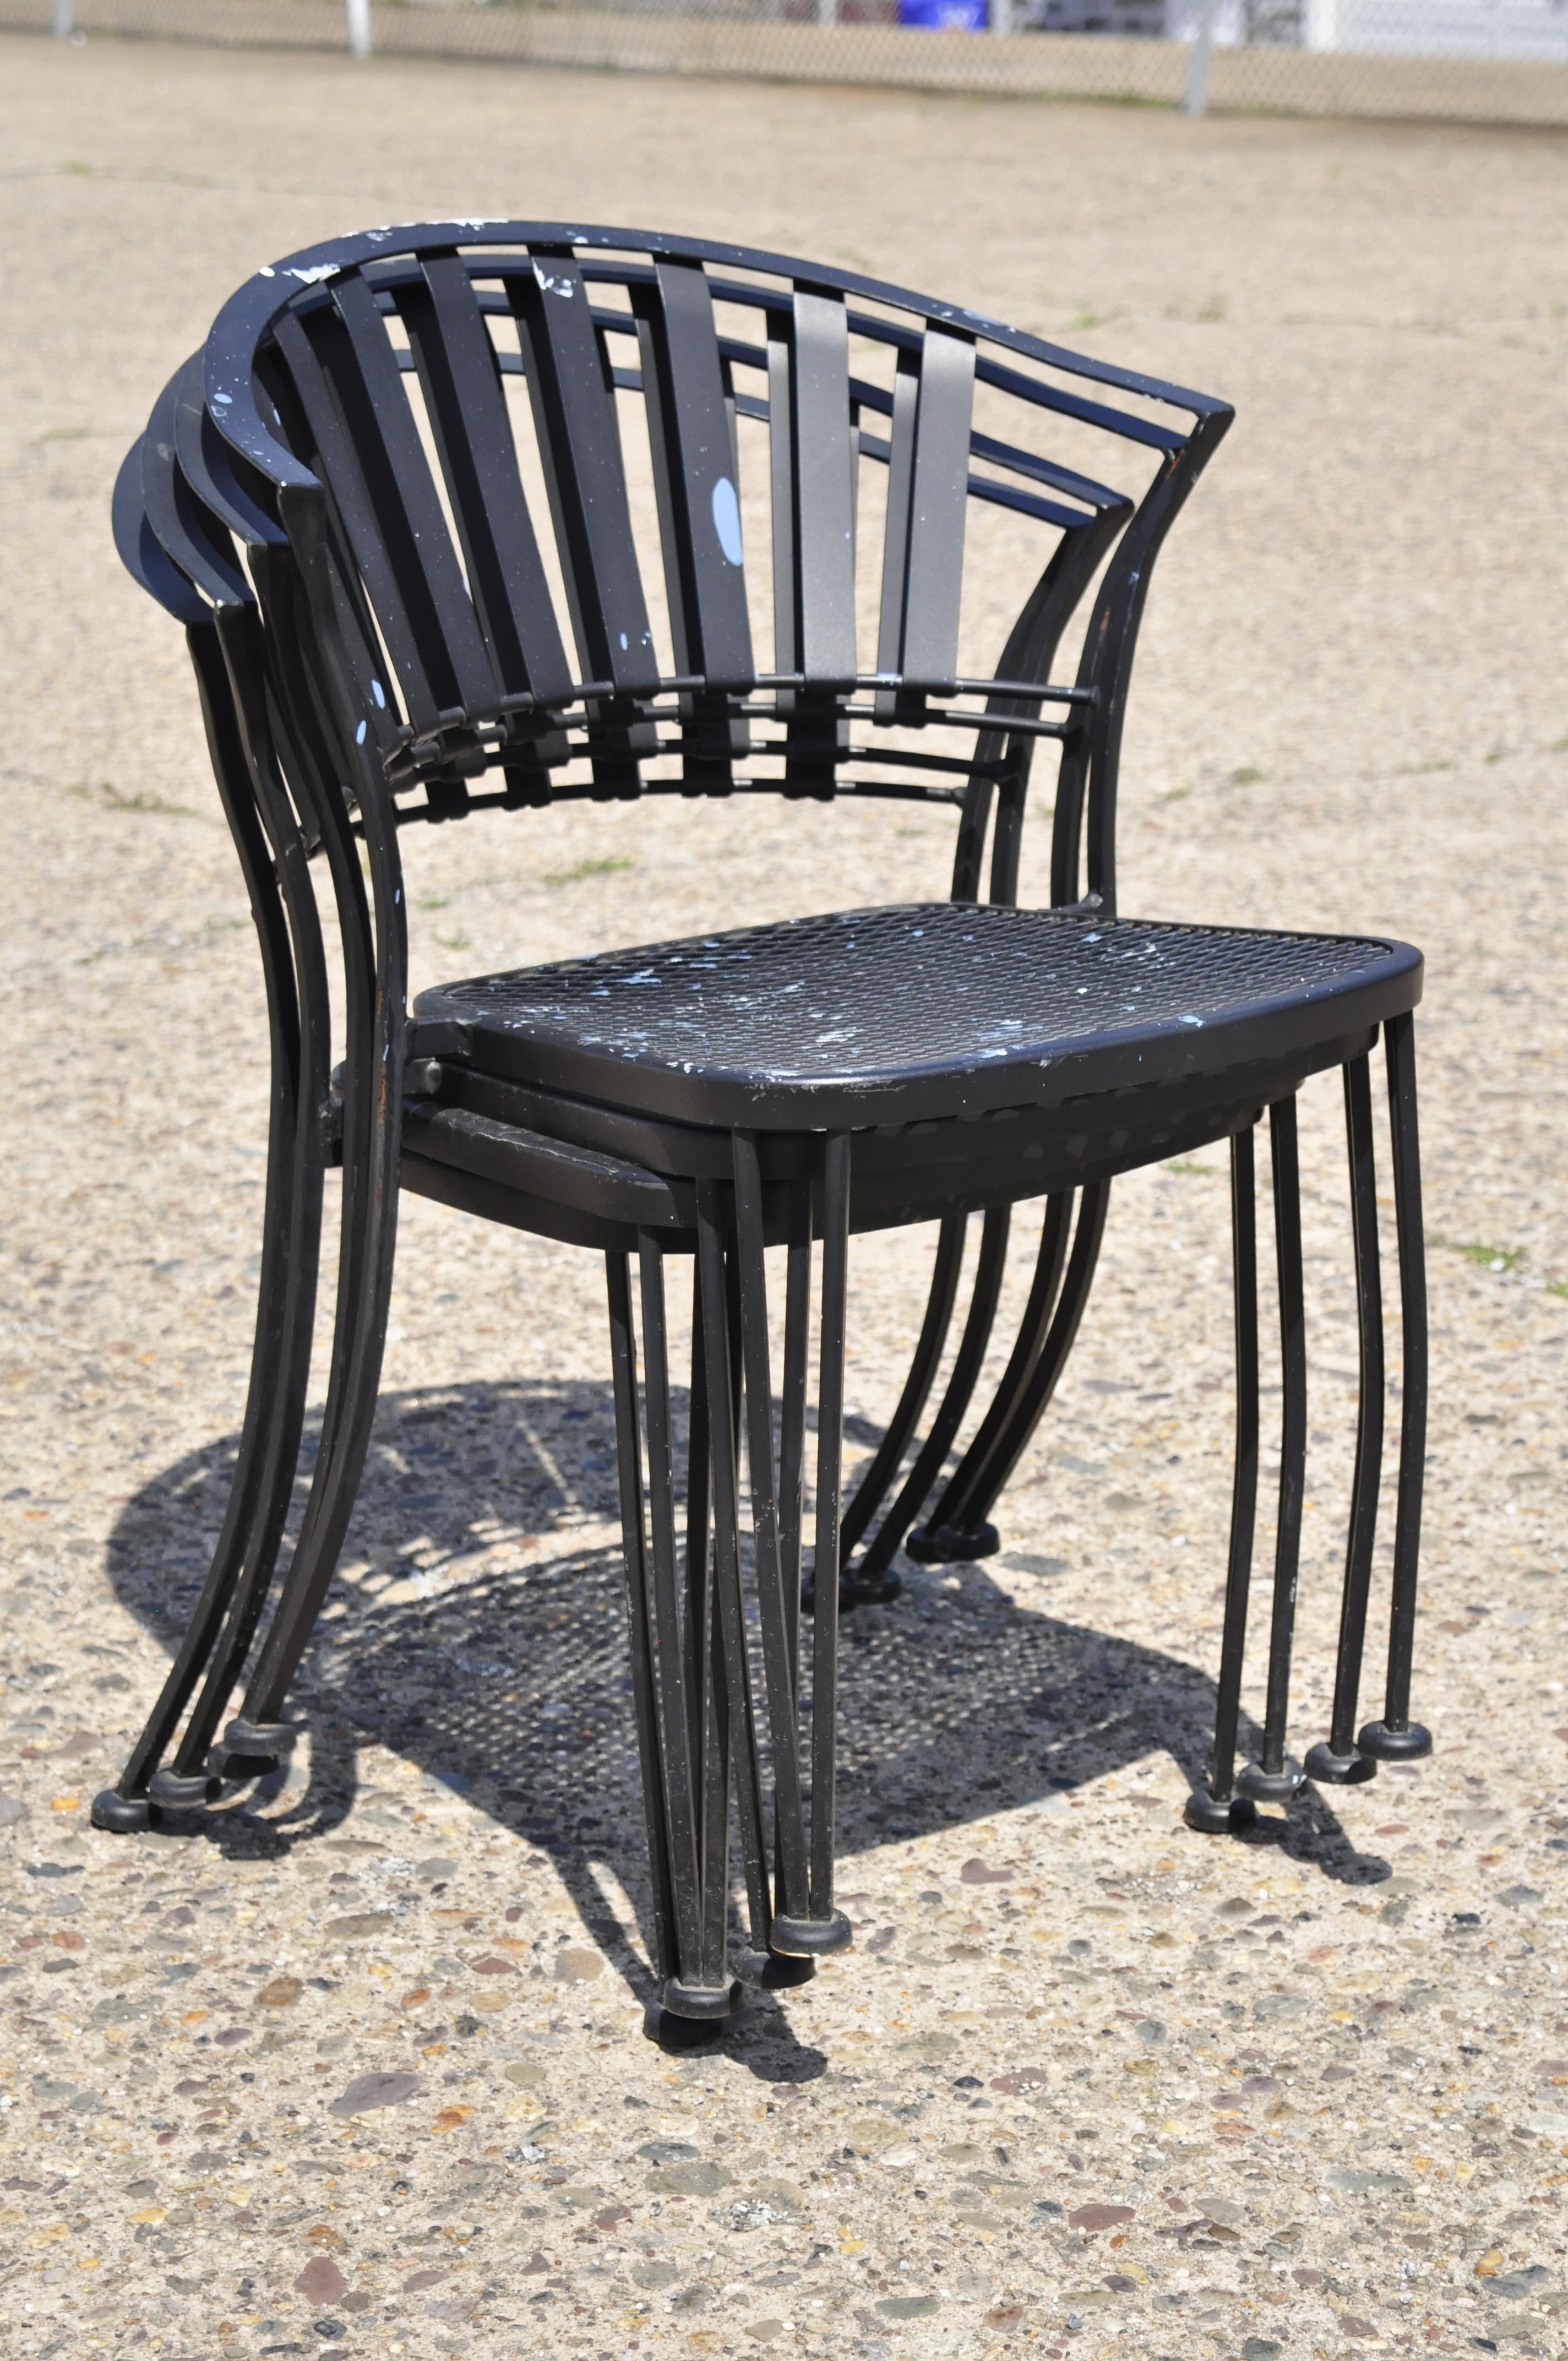 Modern wrought iron barrel back sculptural garden patio dining chairs - set of 4. Item features stacking chairs, wrought iron construction, clean modernist lines, sleek sculptural form. Circa Late 20th century. Measurements: 32